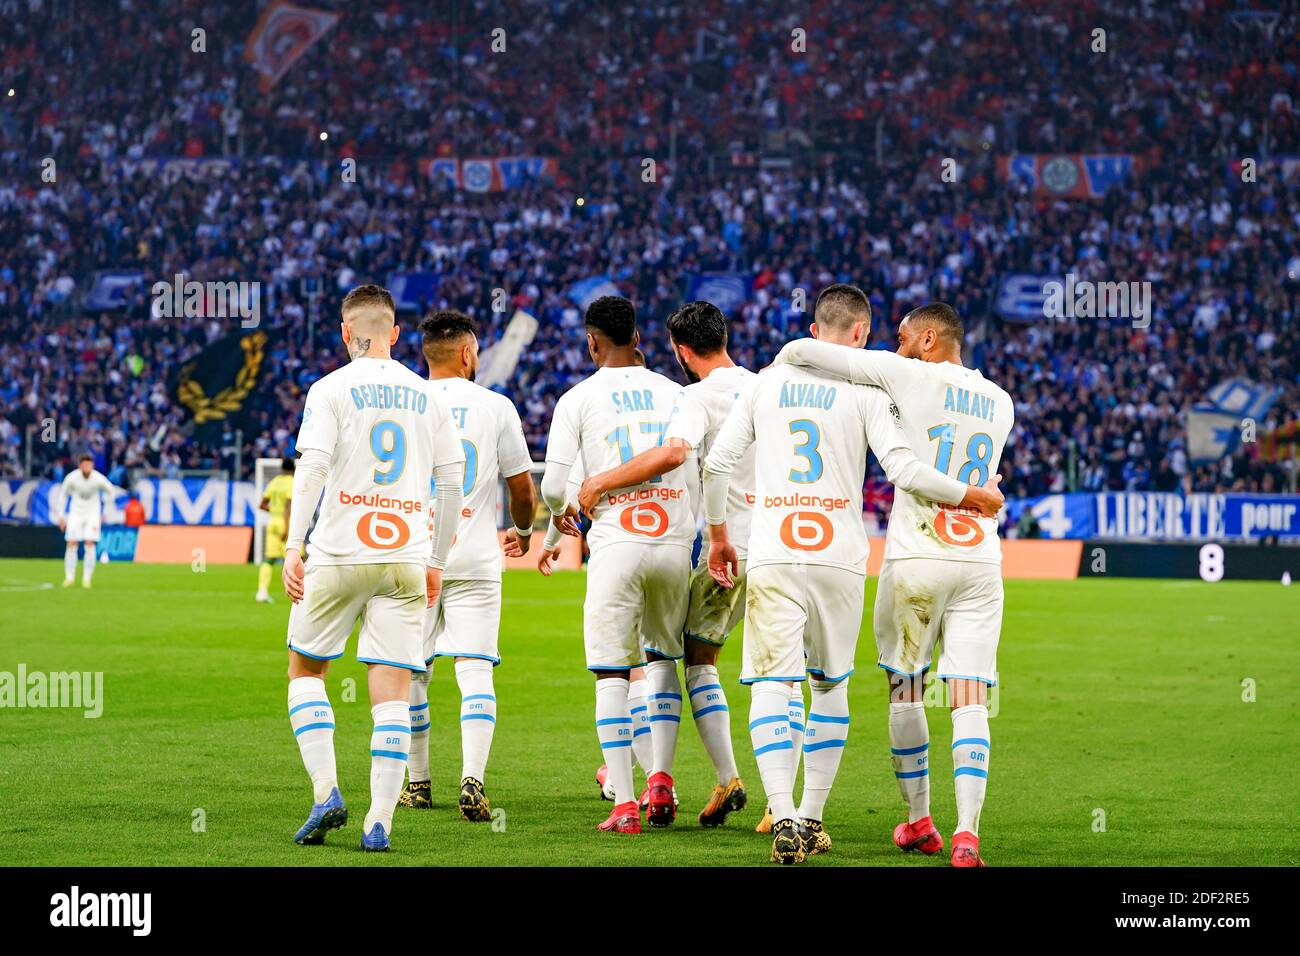 OM players celebrate the Morgan Sanson goal during the French Ligue 1  football match Olympique de Marseille v FC Nantes at the Orange Velodrome,  in Marseille, France on February 22, 2020. Photo